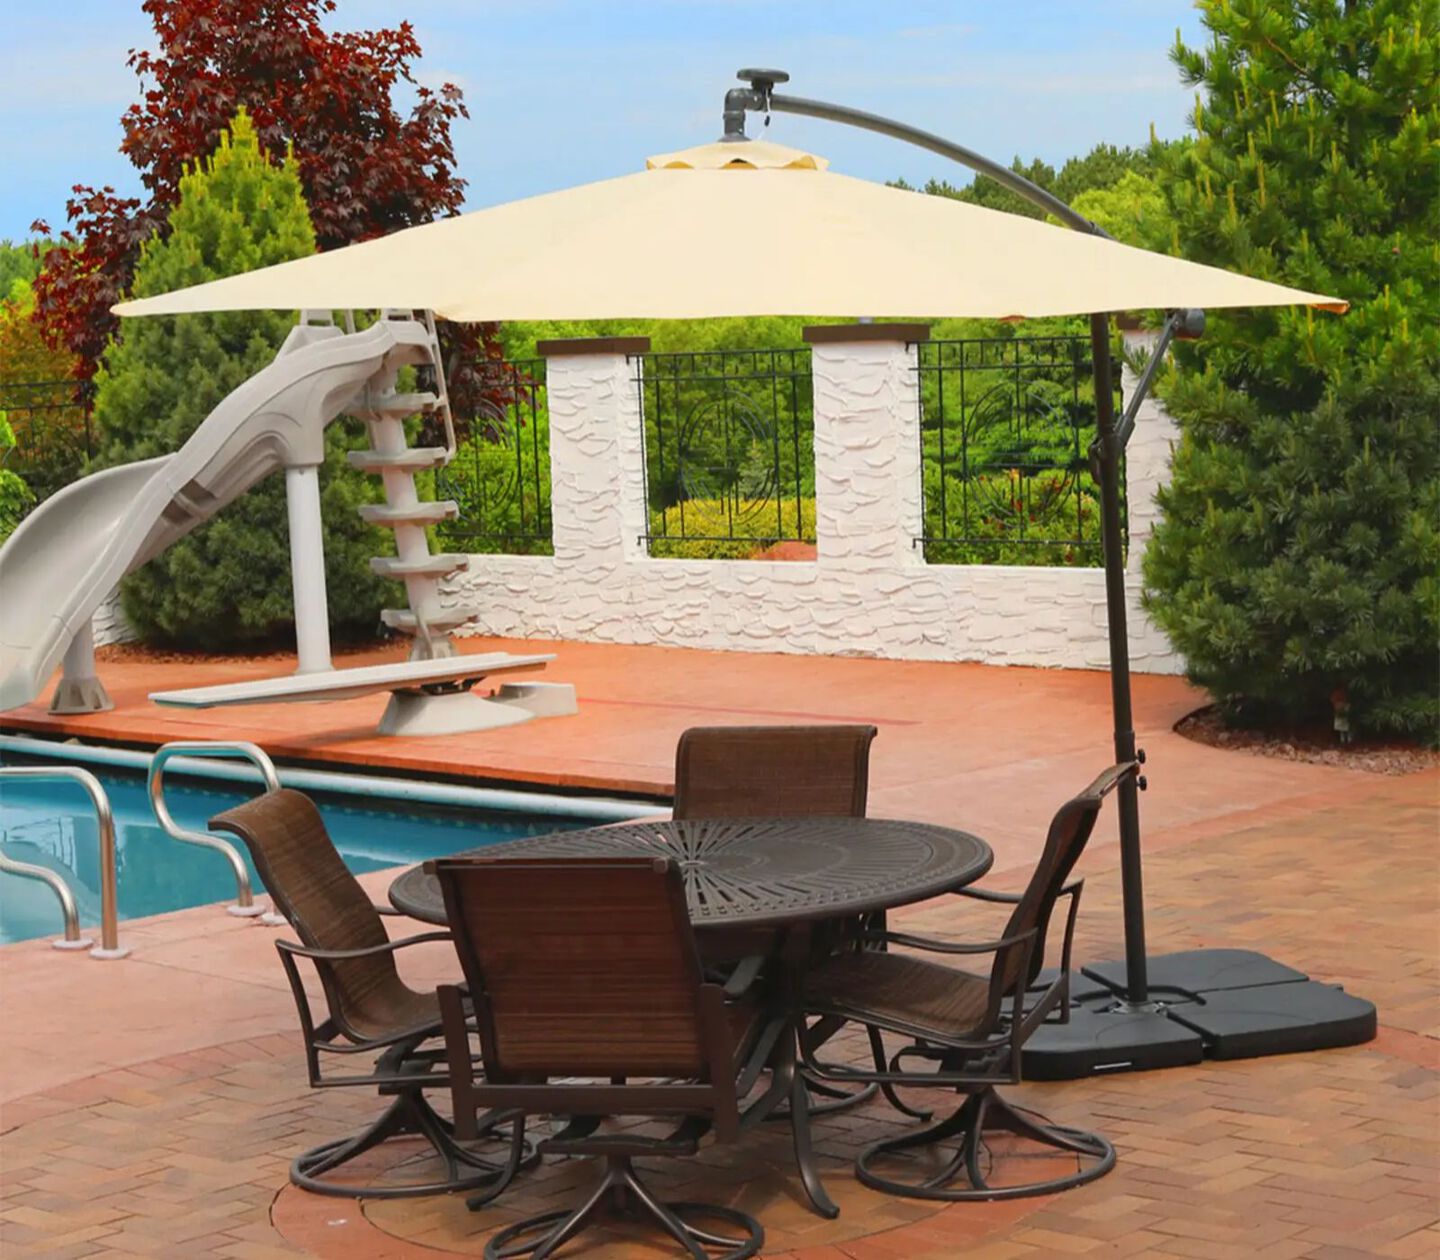 Brown and black patio table and chairs covered by a beige standing umbrella